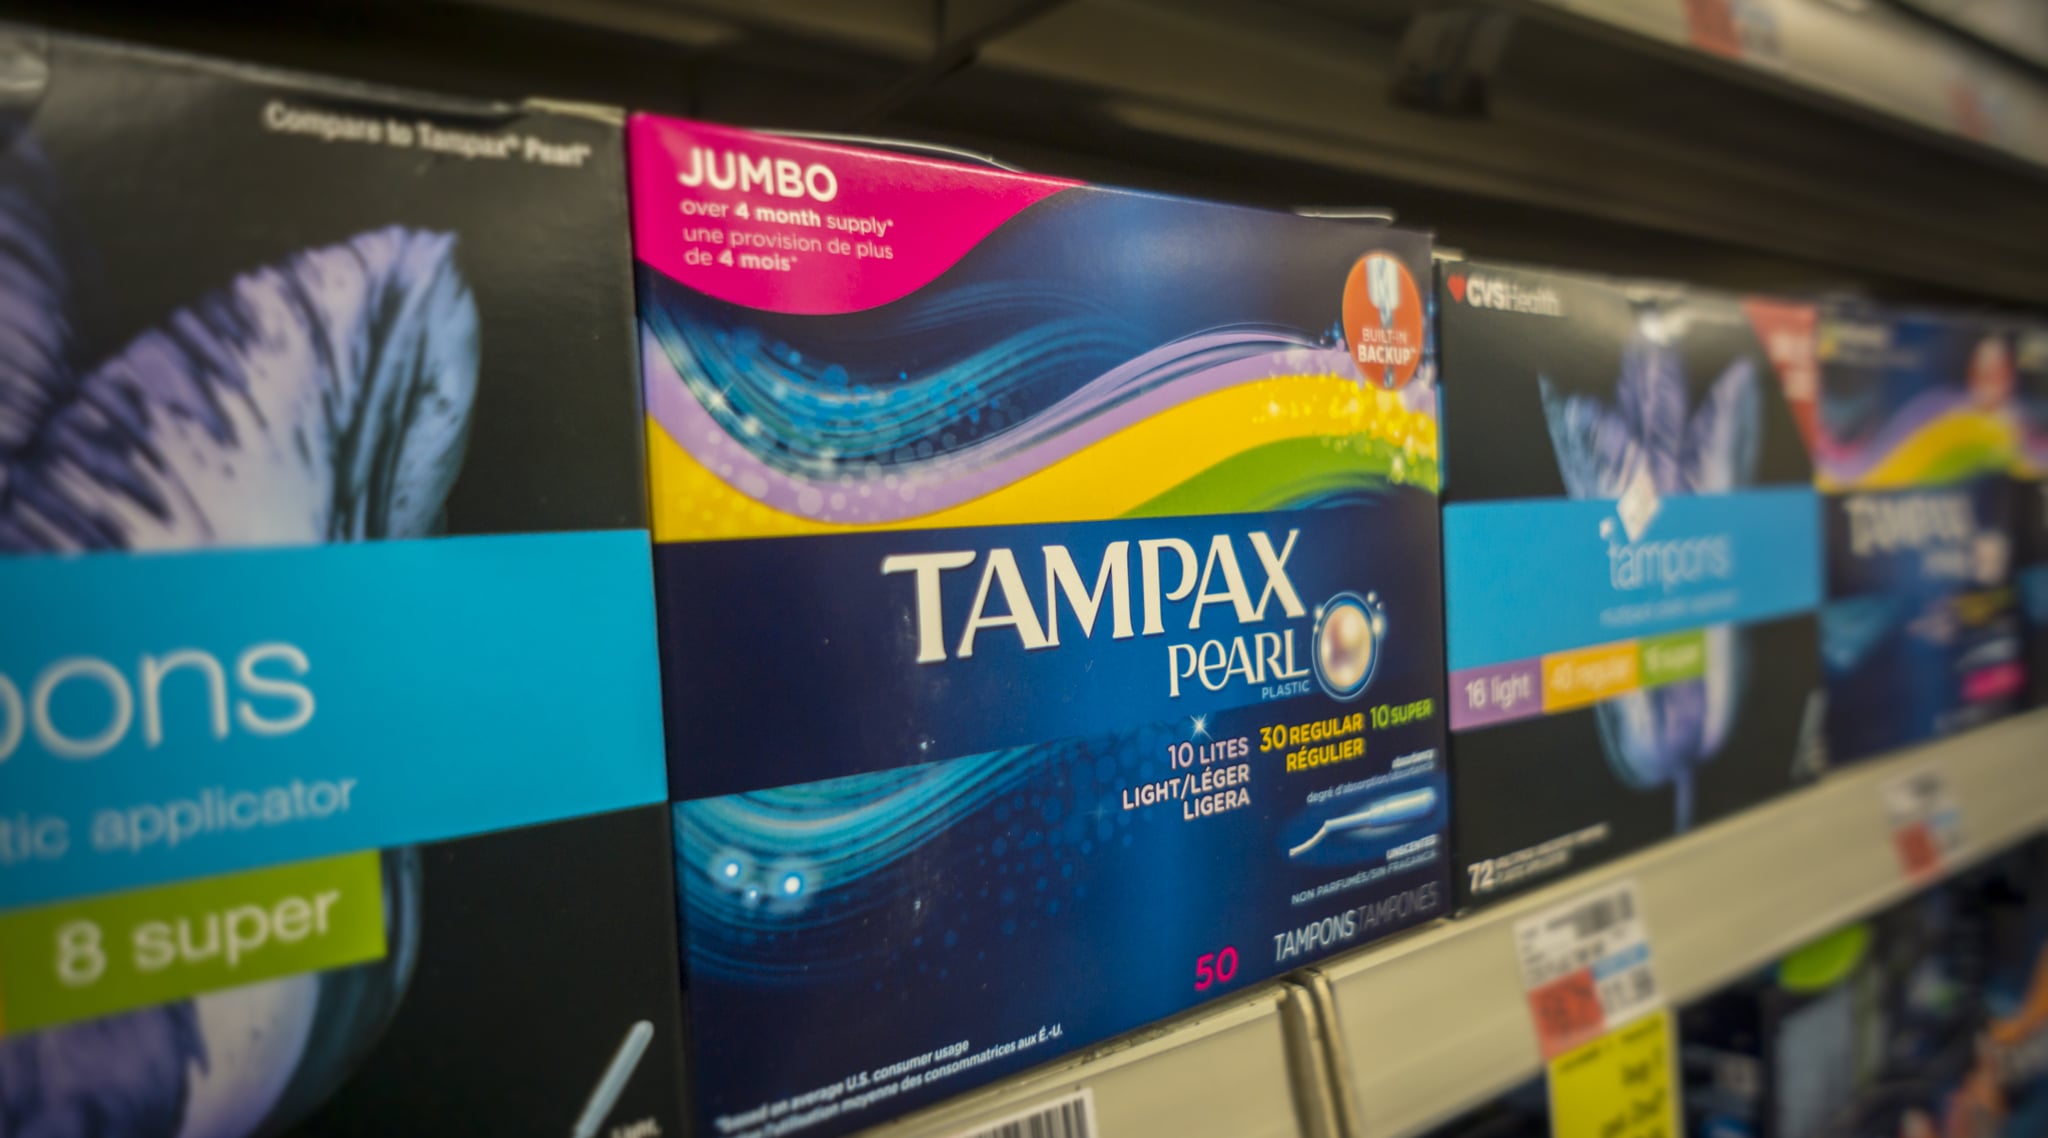 Packages of Tampax brand tampons on a drugstore shelf in New York on Wednesday, February 10, 2016. A bill making its way through the Utah legislature would eliminate tax on tampons and other feminine hygiene products. 40 states currently impose a sales tax on feminine hygiene products and there is also a bill under consideration in California to eliminate the tax. ( Richard B. Levine) (Photo by Richard Levine/Corbis via Getty Images)